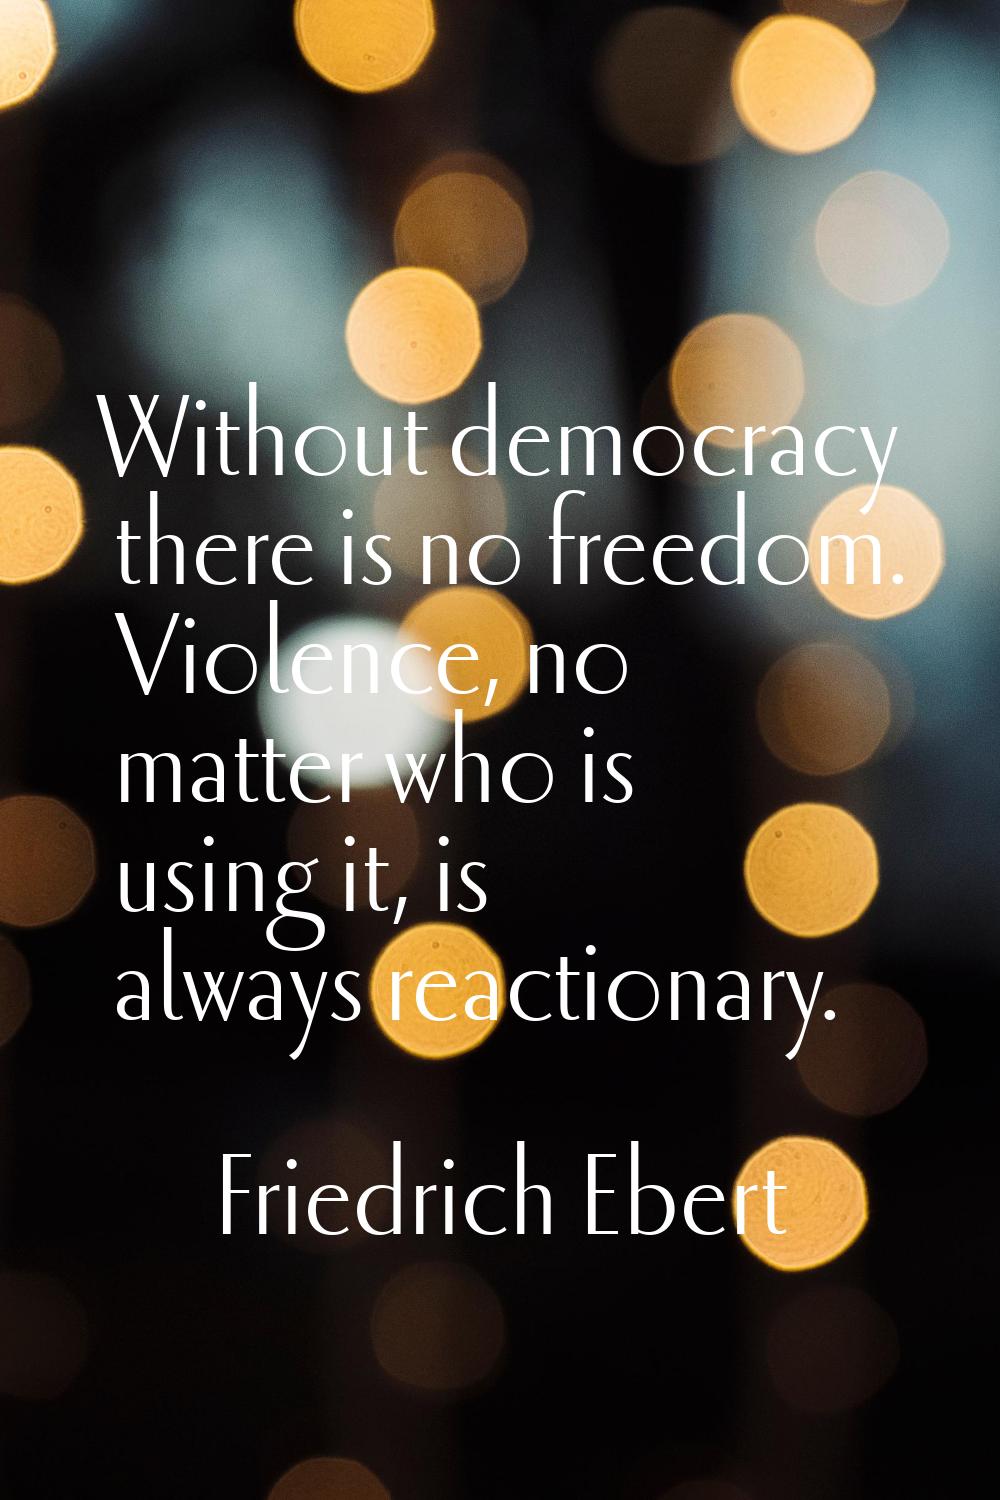 Without democracy there is no freedom. Violence, no matter who is using it, is always reactionary.